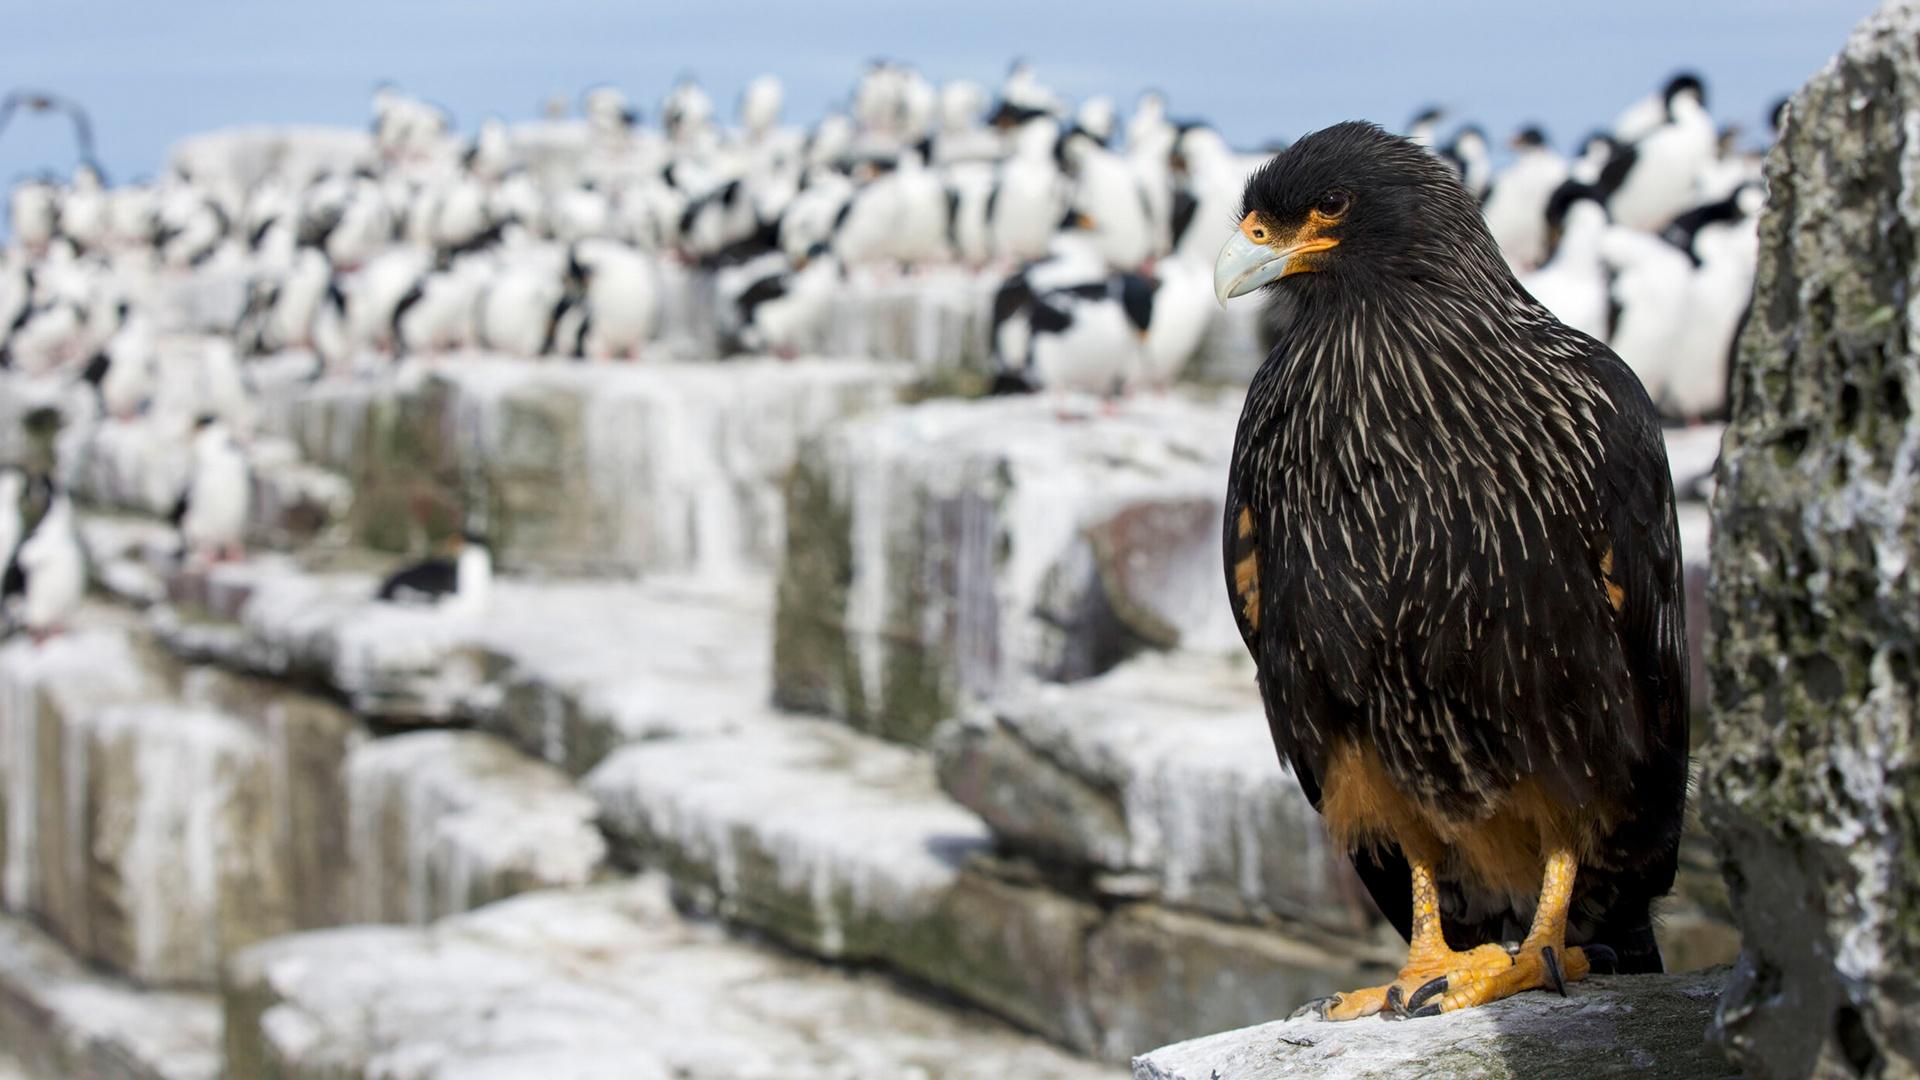 A caracara bird sits on a rock, while a colony of penguins are blurred in the background.